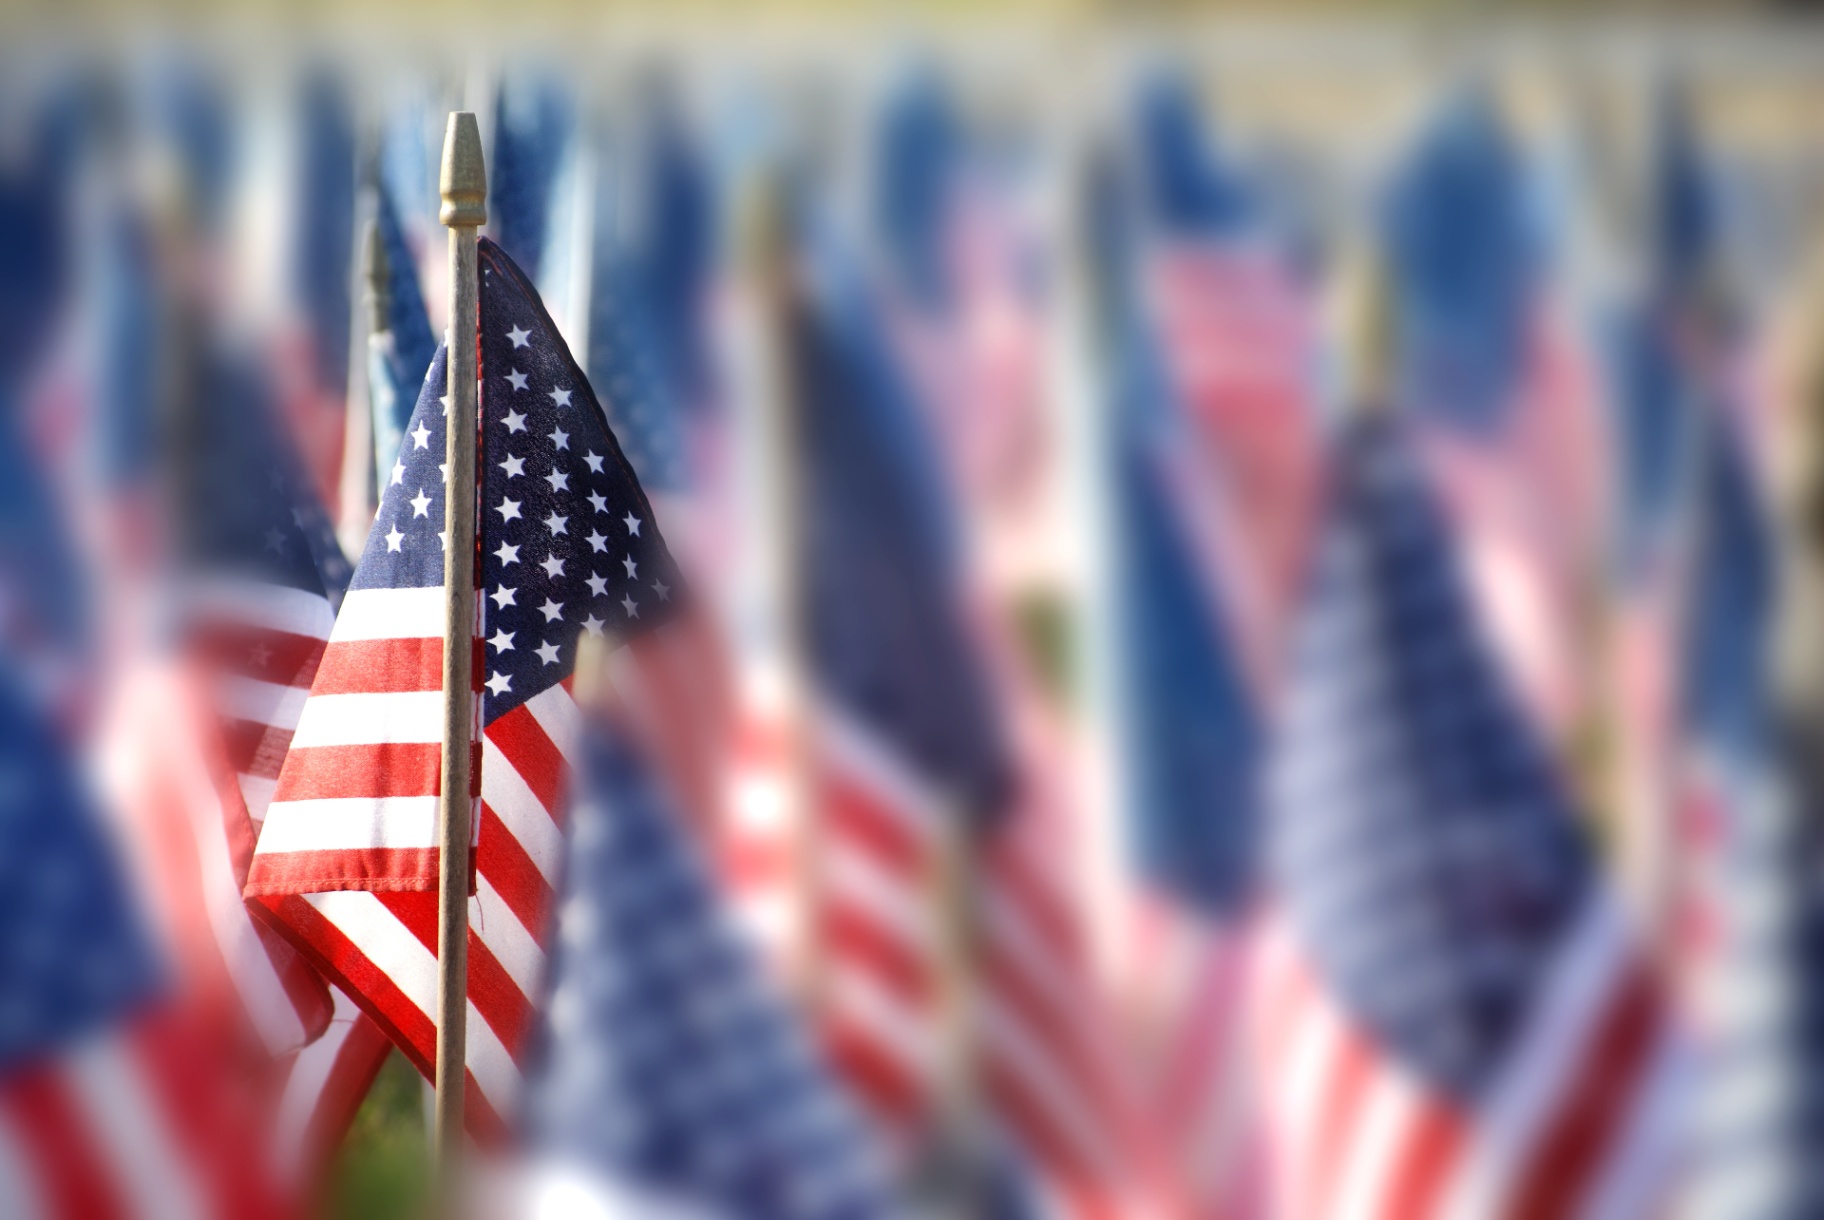 11 WAYS TO CELEBRATE VETERANS DAY: HONOR THOSE WHO SERVED